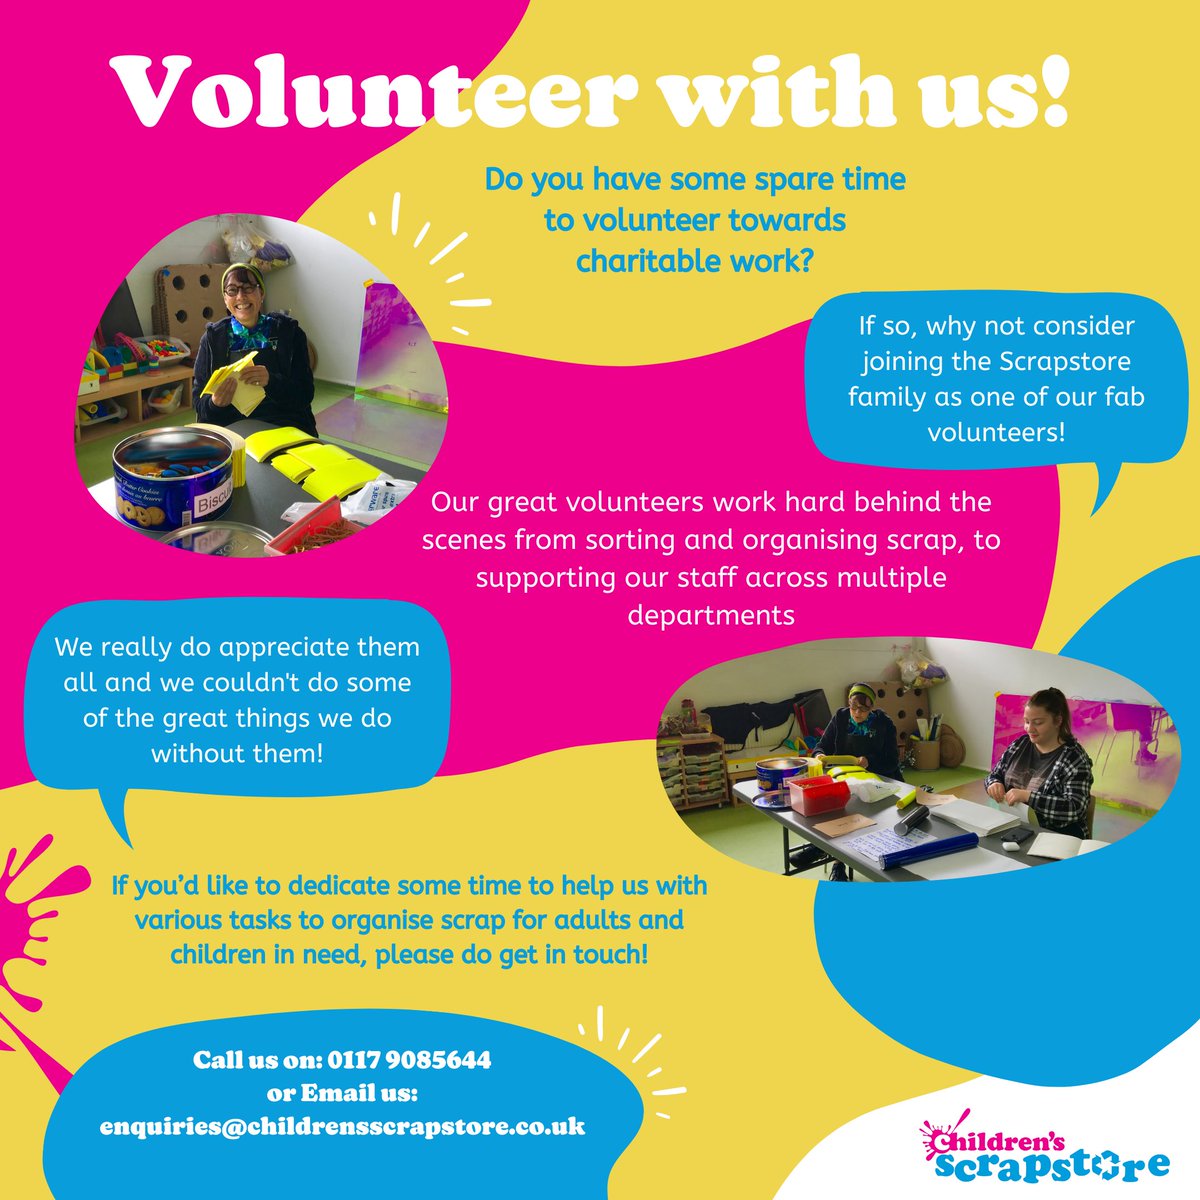 Volunteer with us!
We're always on the lookout for new volunteers to help us get everything ship-shape and Bristol fashion here 😊 

If you have any time you could donate to us, get in contact today 🌟

📞 0117 908 5644
📧 enquiries@childrensscrapstore.co.uk

#childrensscrapstore